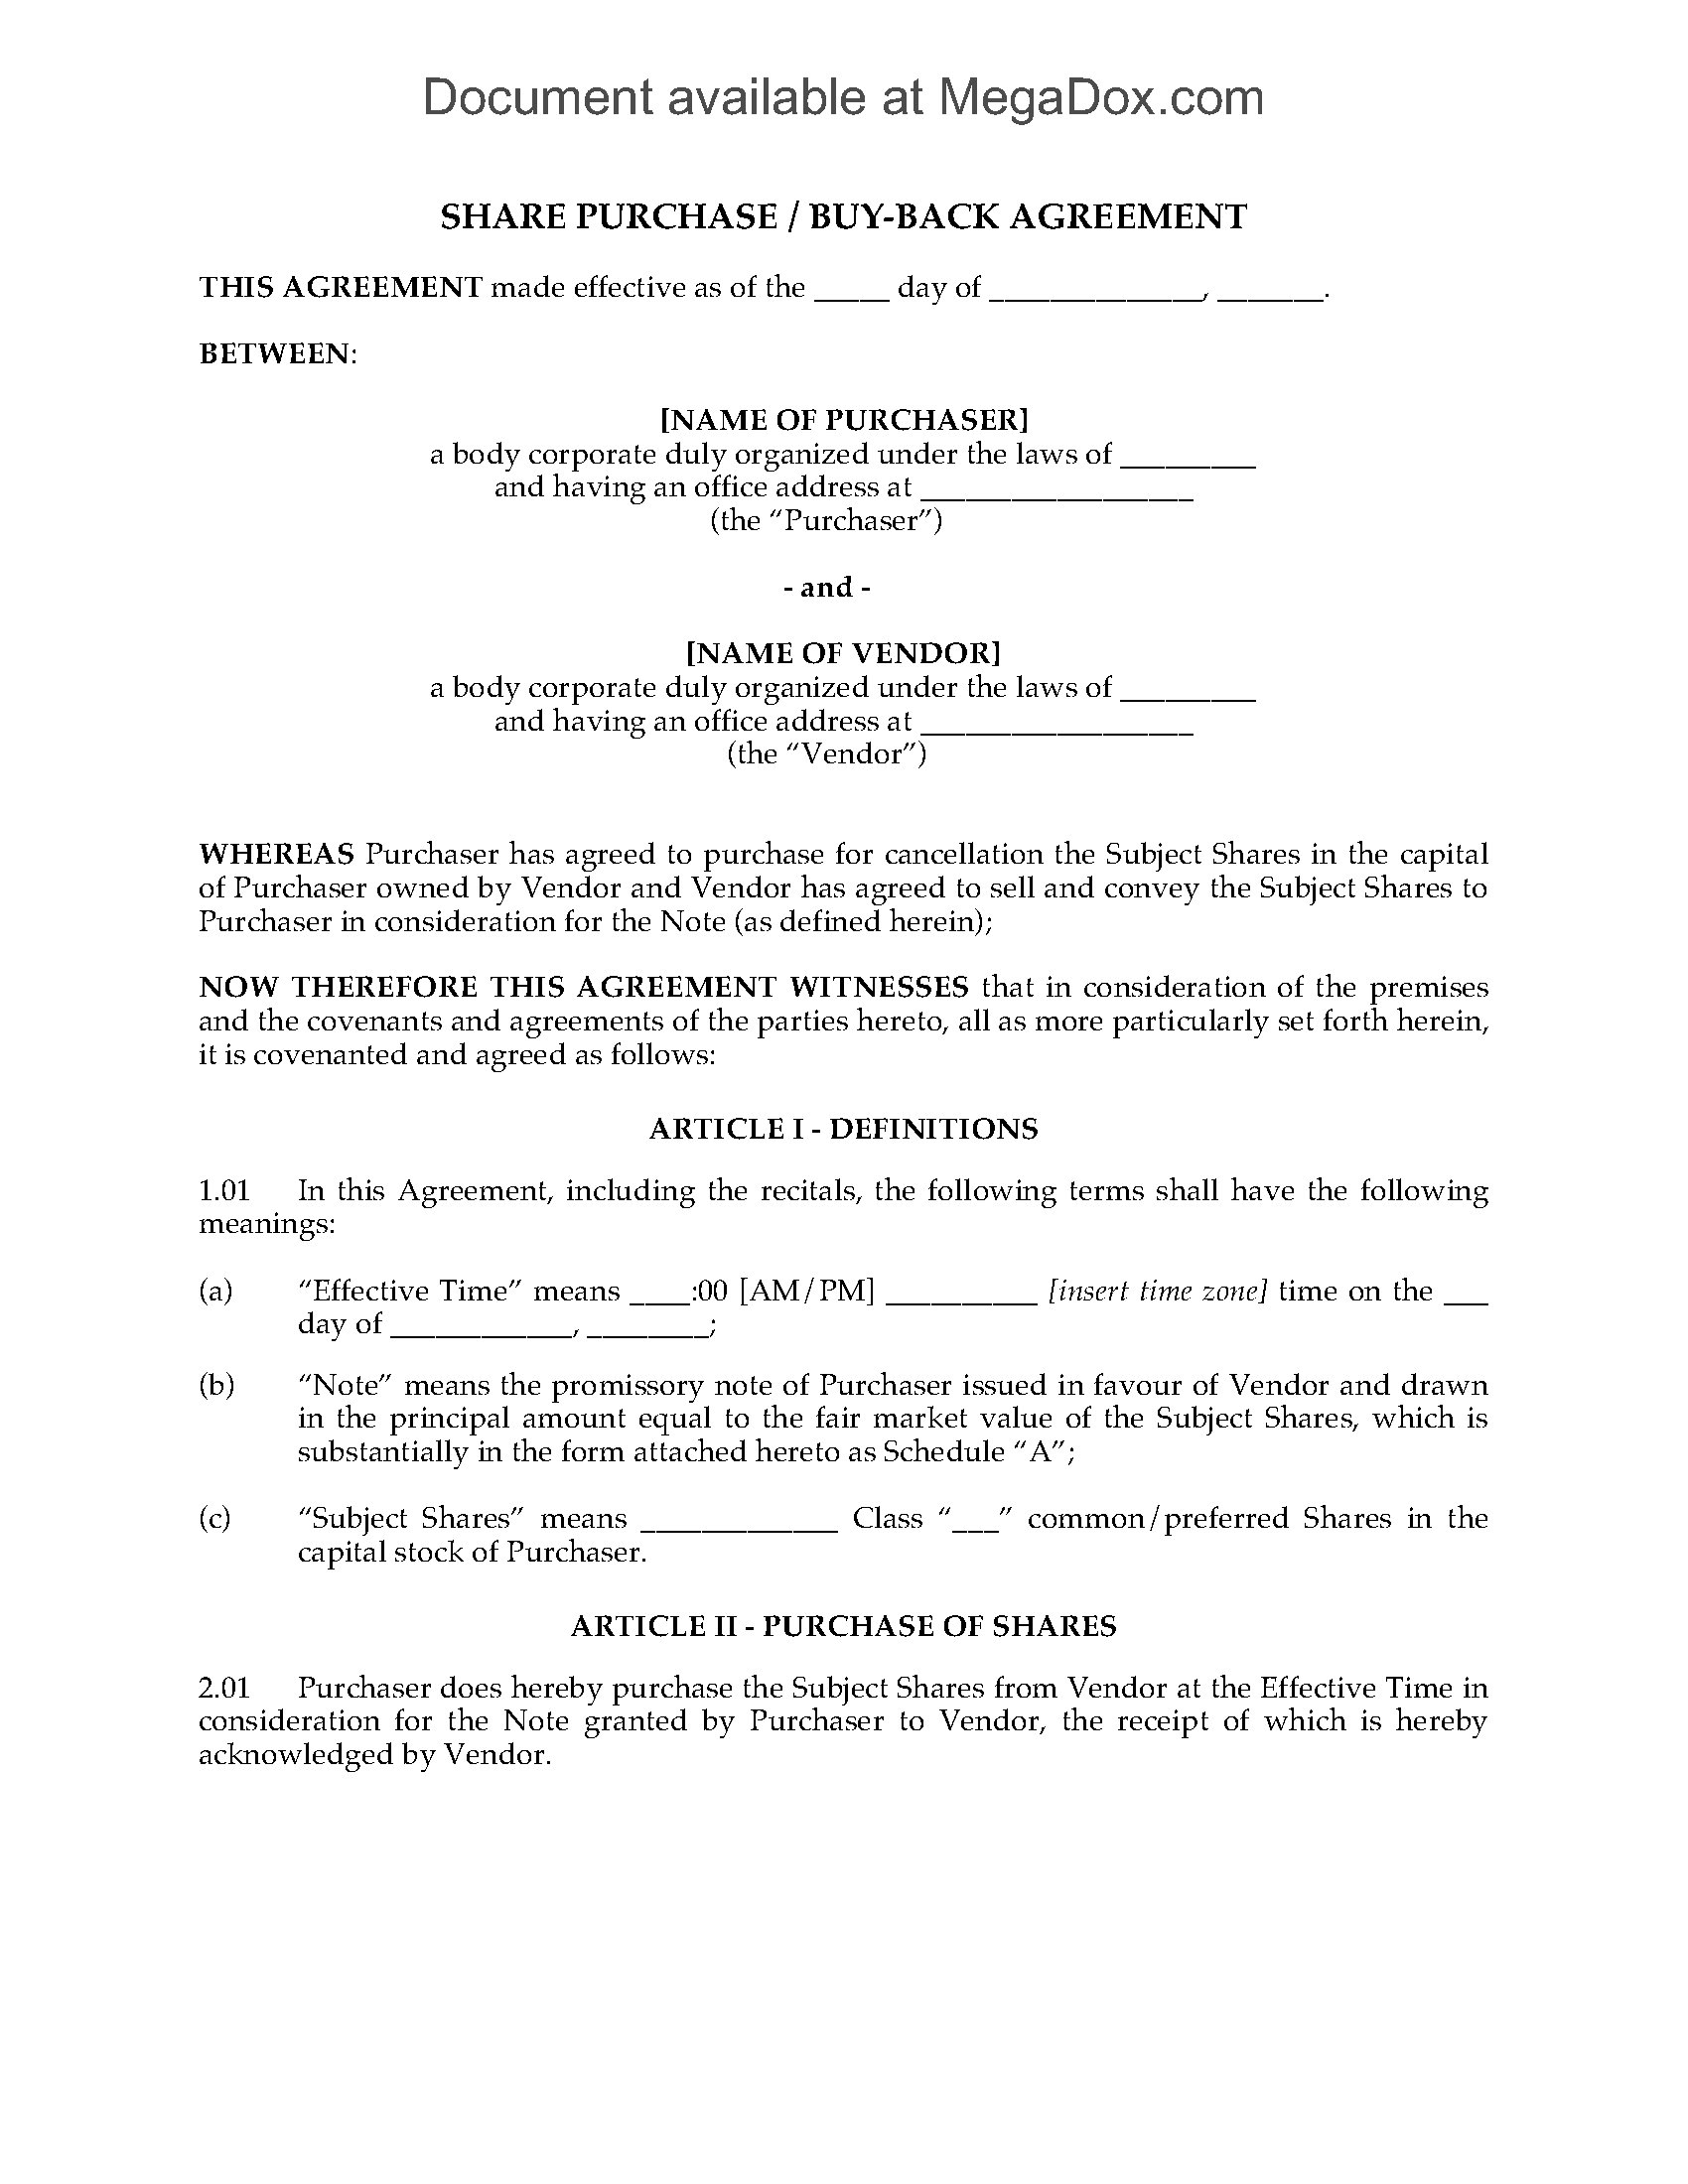 Share Repurchase / Buy-Back Agreement  Legal Forms and Business Intended For share buy back agreement template